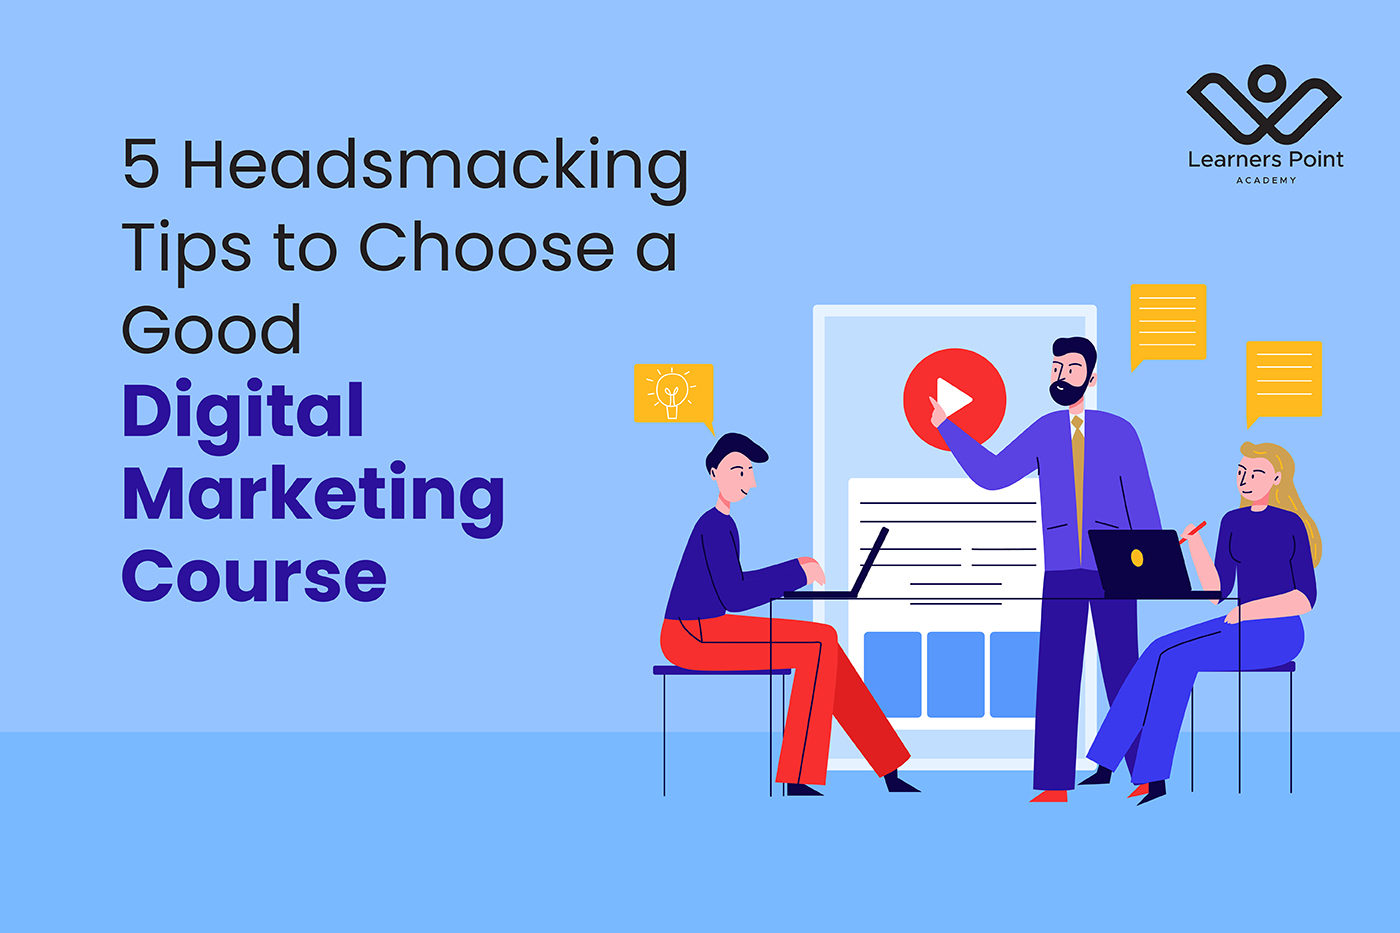 5 Headsmacking Tips to Choose a Good Digital Marketing Course